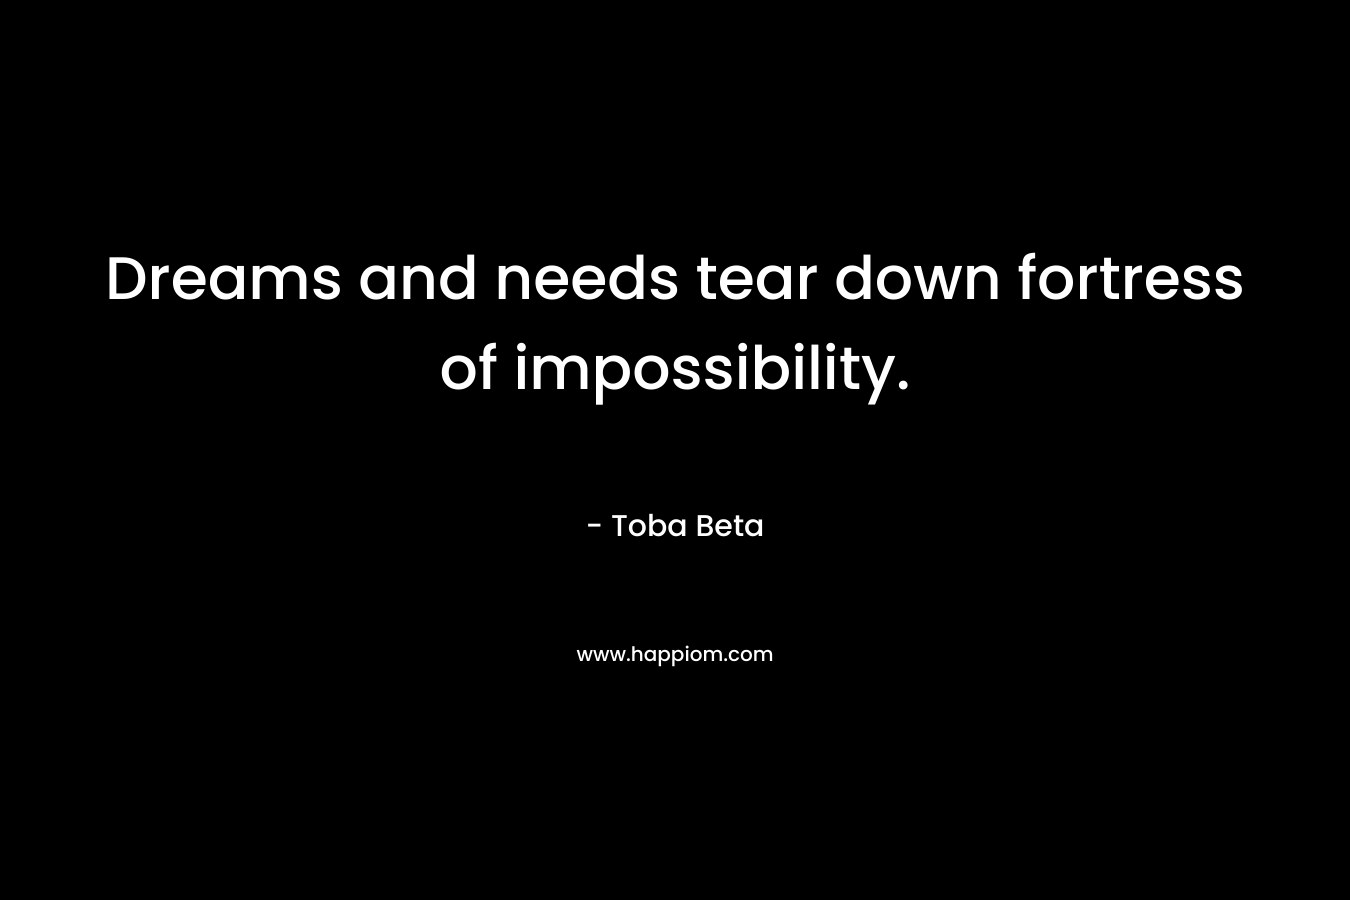 Dreams and needs tear down fortress of impossibility.